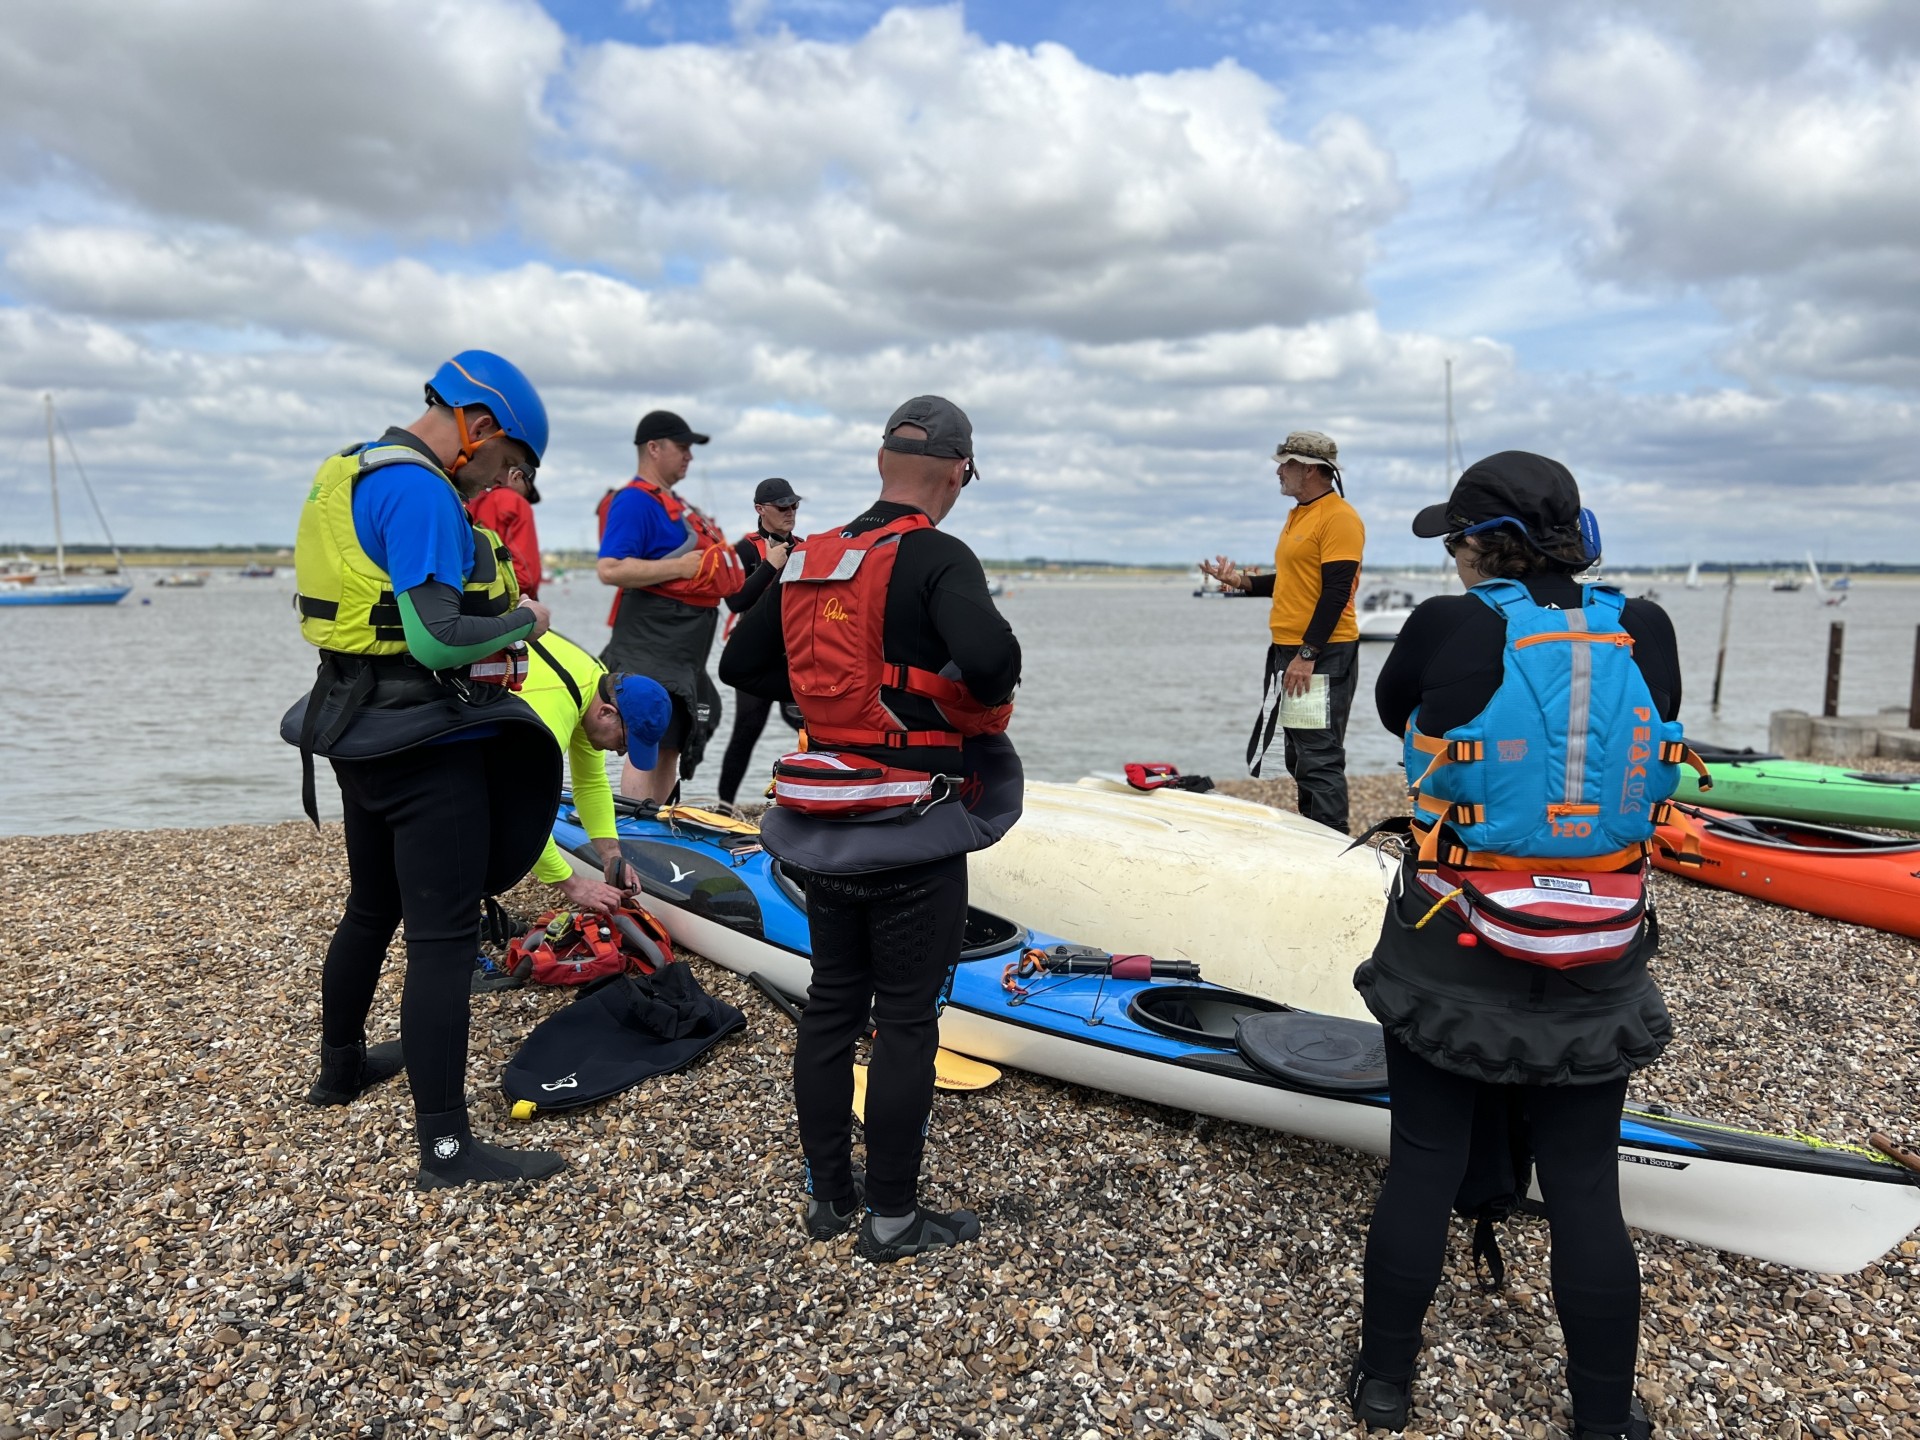 Safety briefing before launching with NOMAD Sea Kayaking.